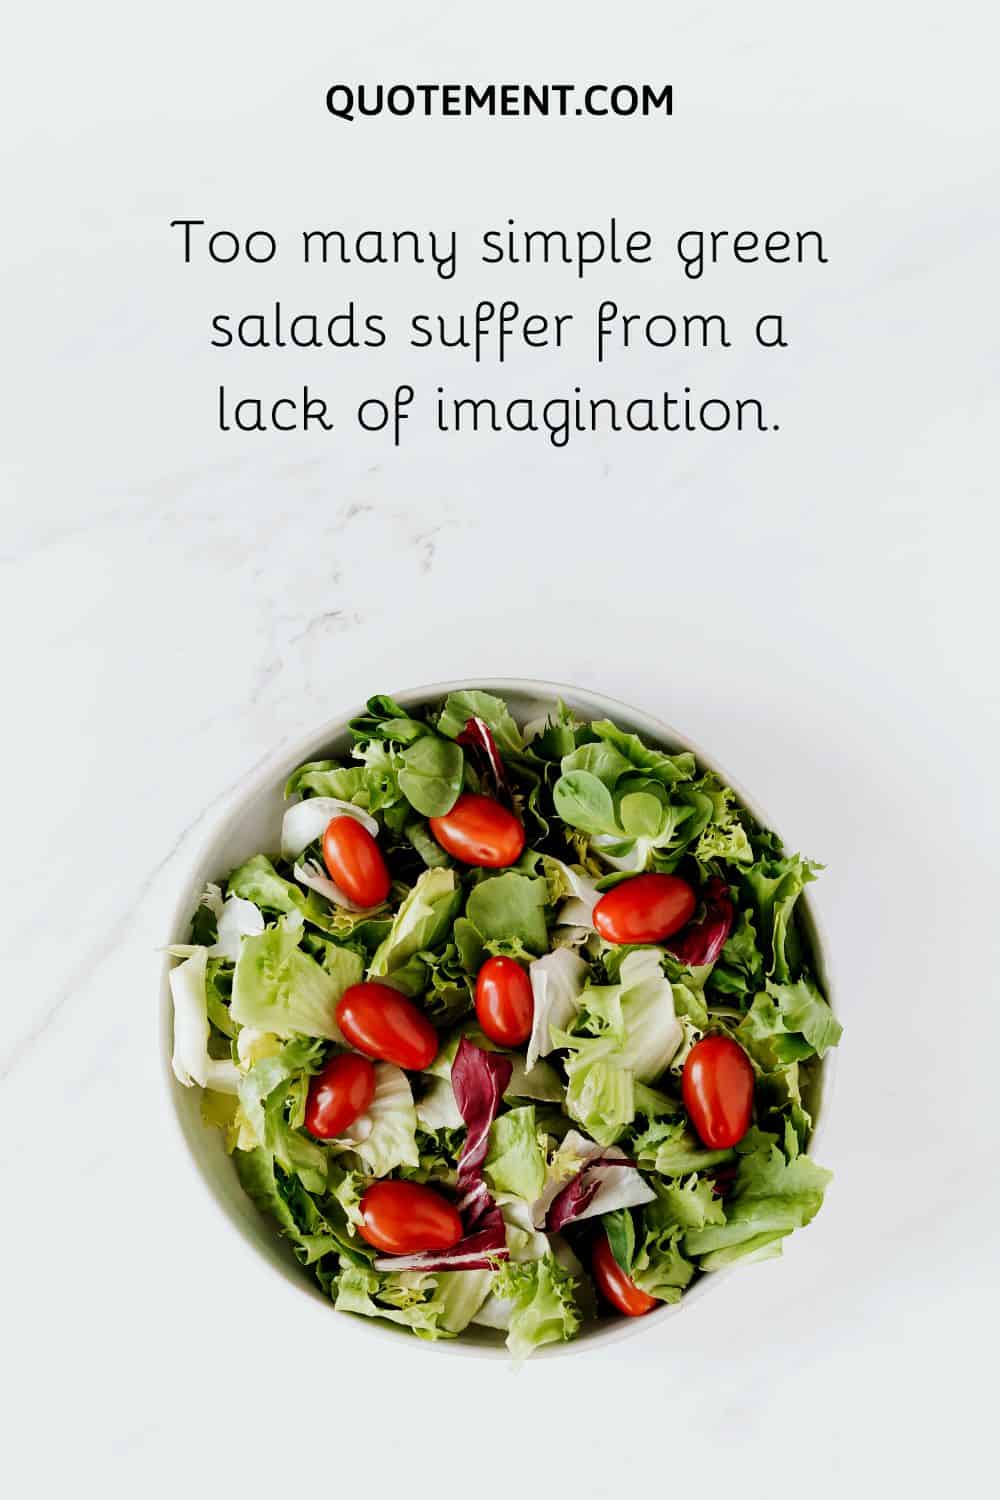 Too many simple green salads suffer from a lack of imagination